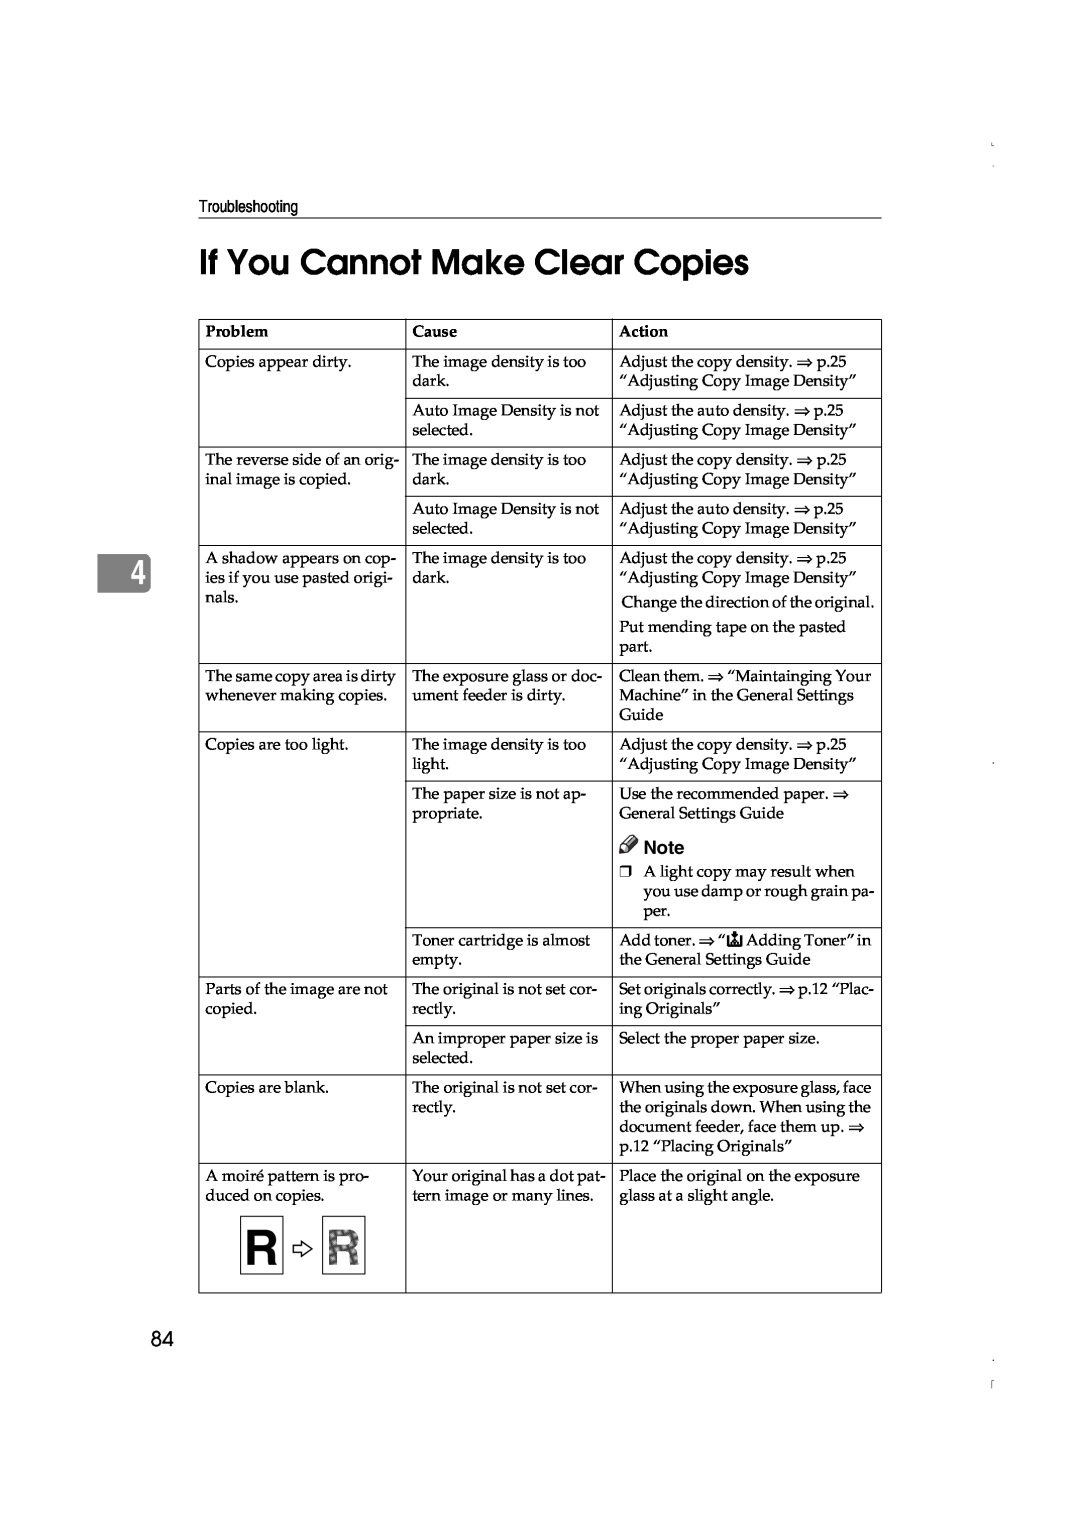 Lanier LD075, LD060 manual If You Cannot Make Clear Copies, Problem, Cause, Action 